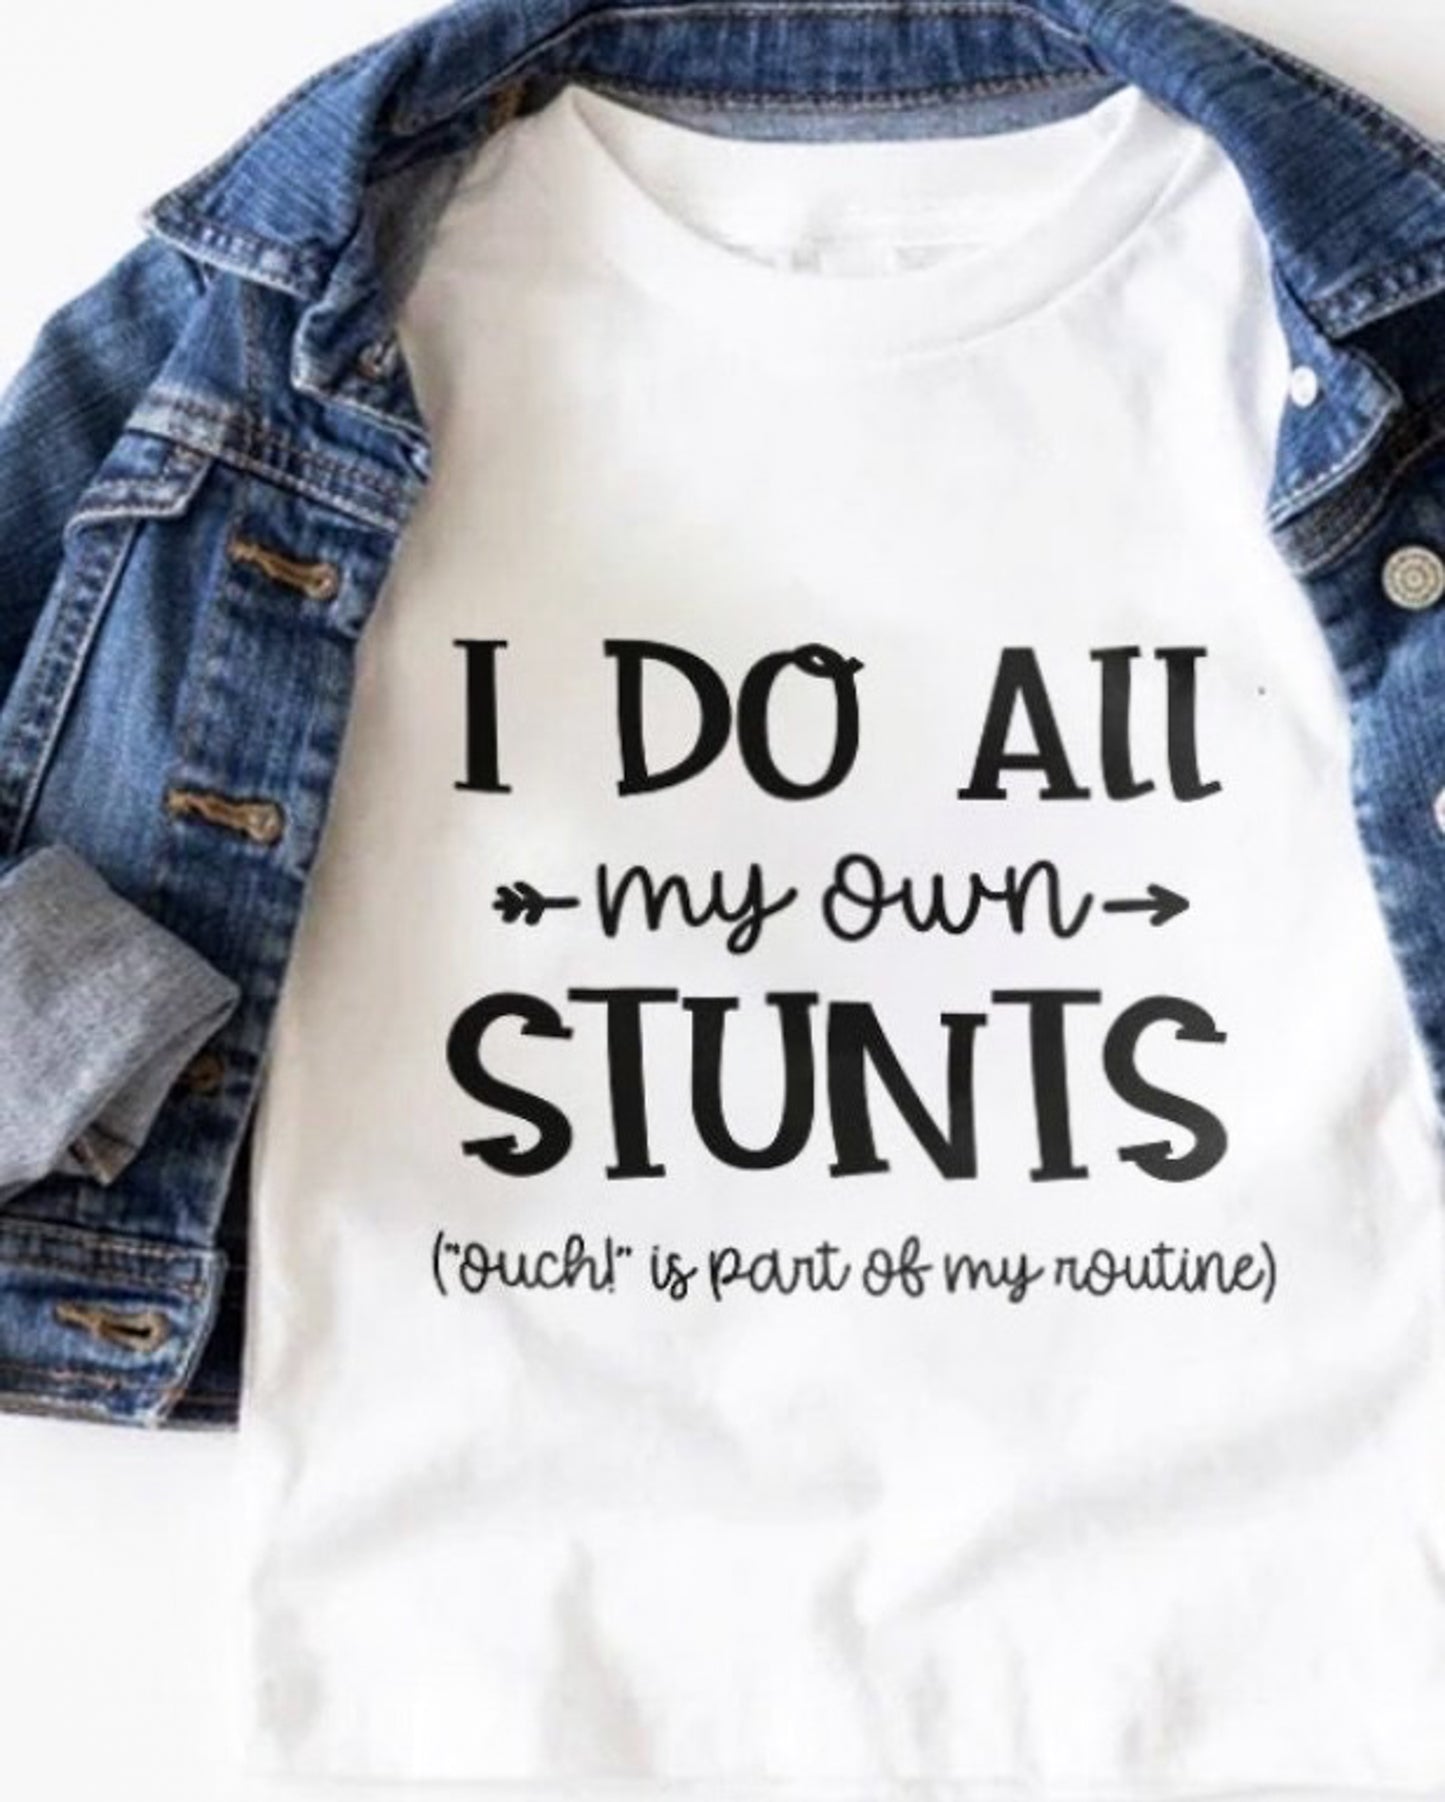 I Do All My Own Stunts (Ouch! Is Part of My Routine) Tee